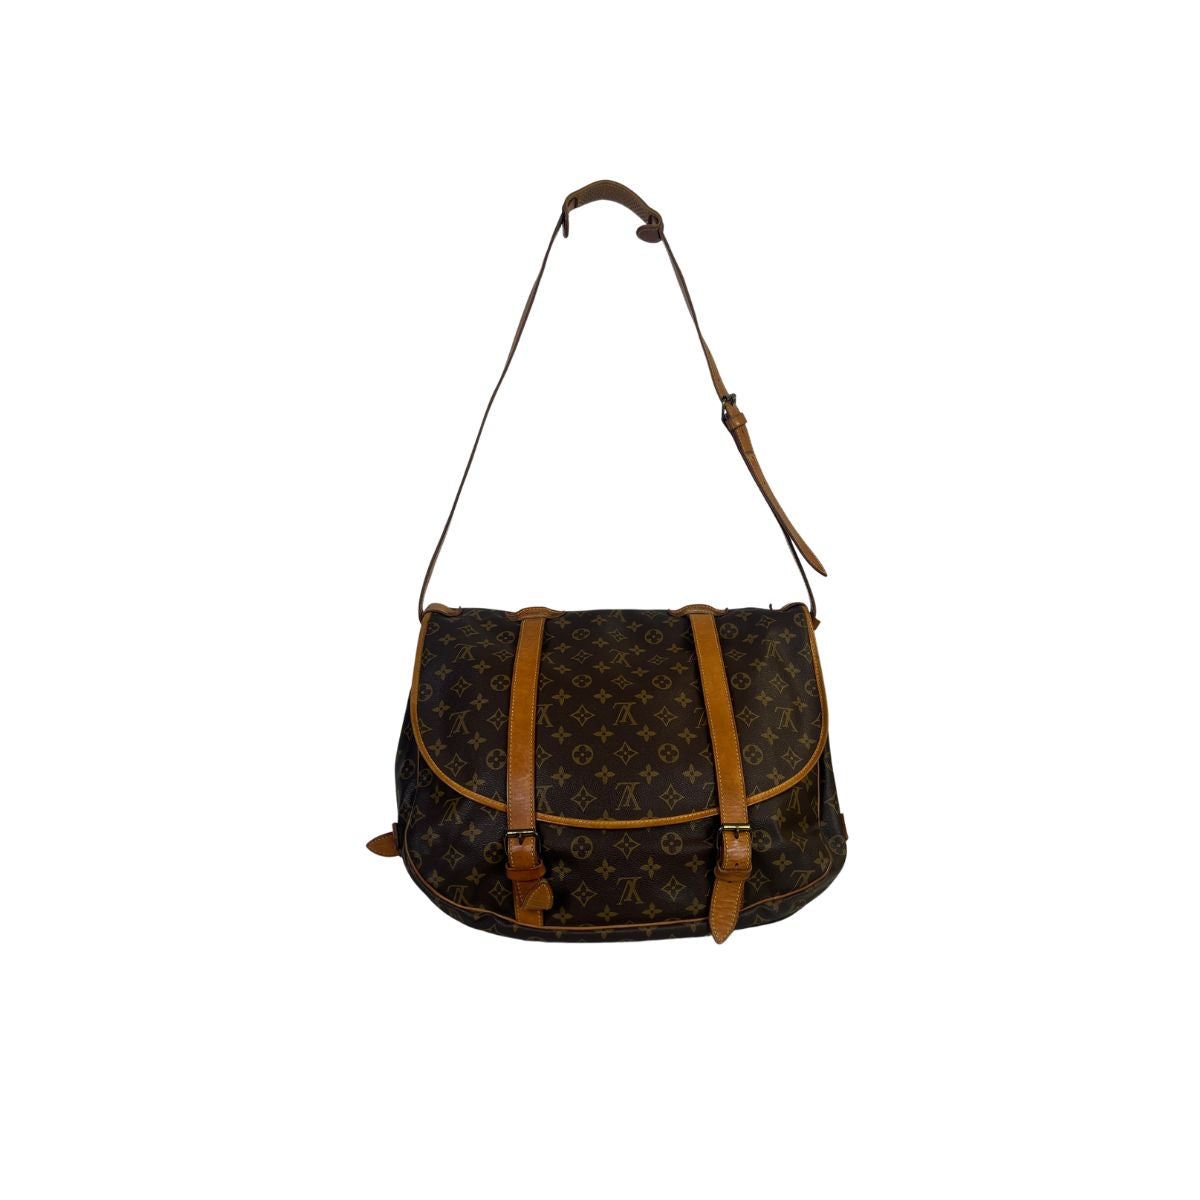 History Of The Louis Vuitton Saumur Bag - Pretty Simple Bags